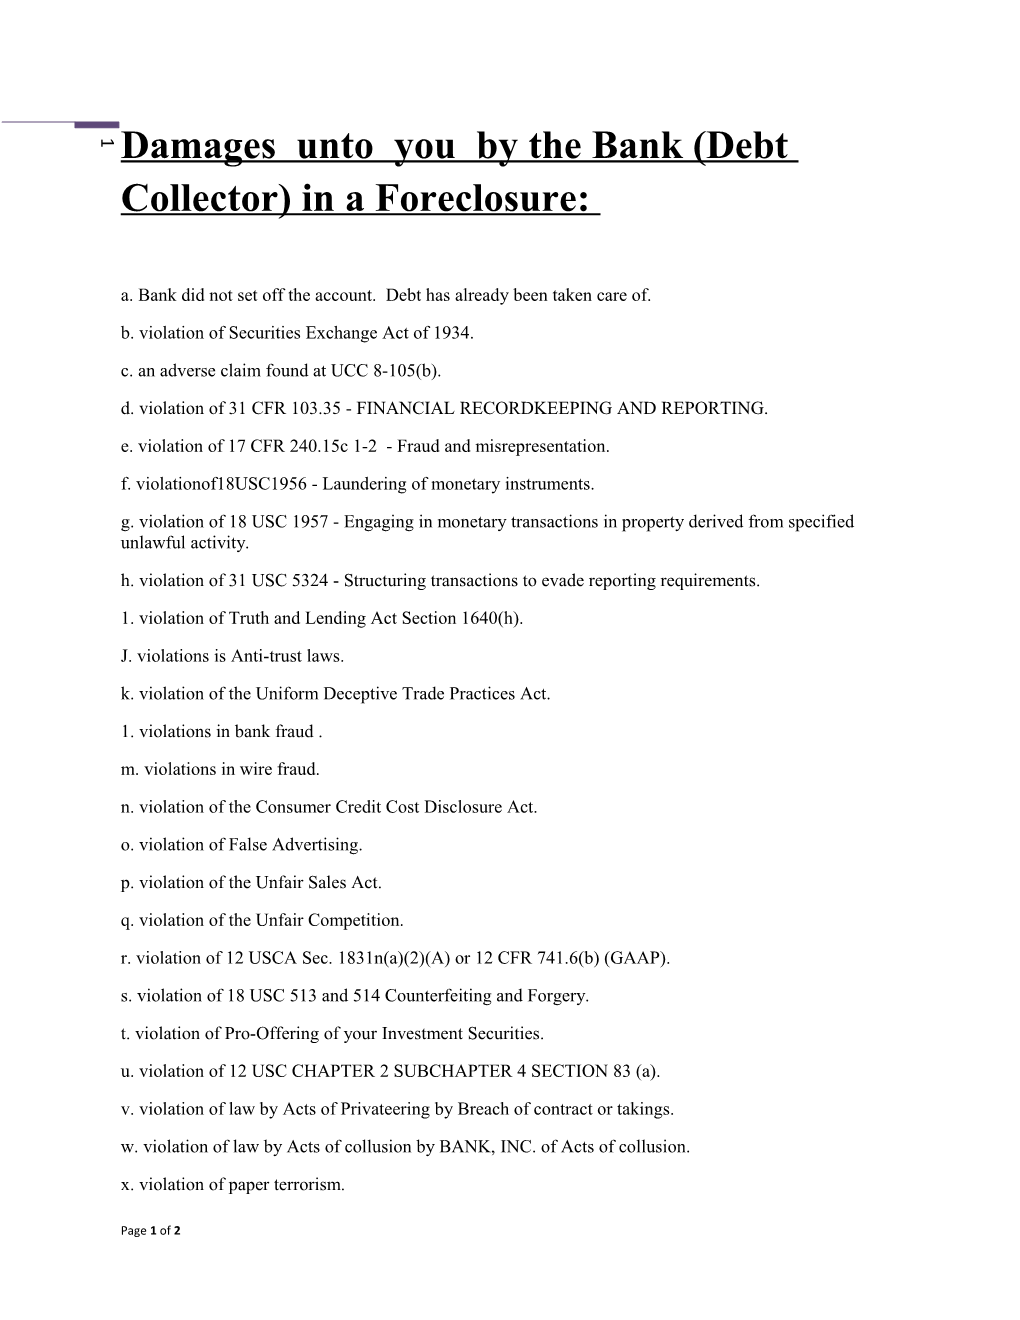 Damages Unto You by the Bank (Debt Collector) in a Foreclosure